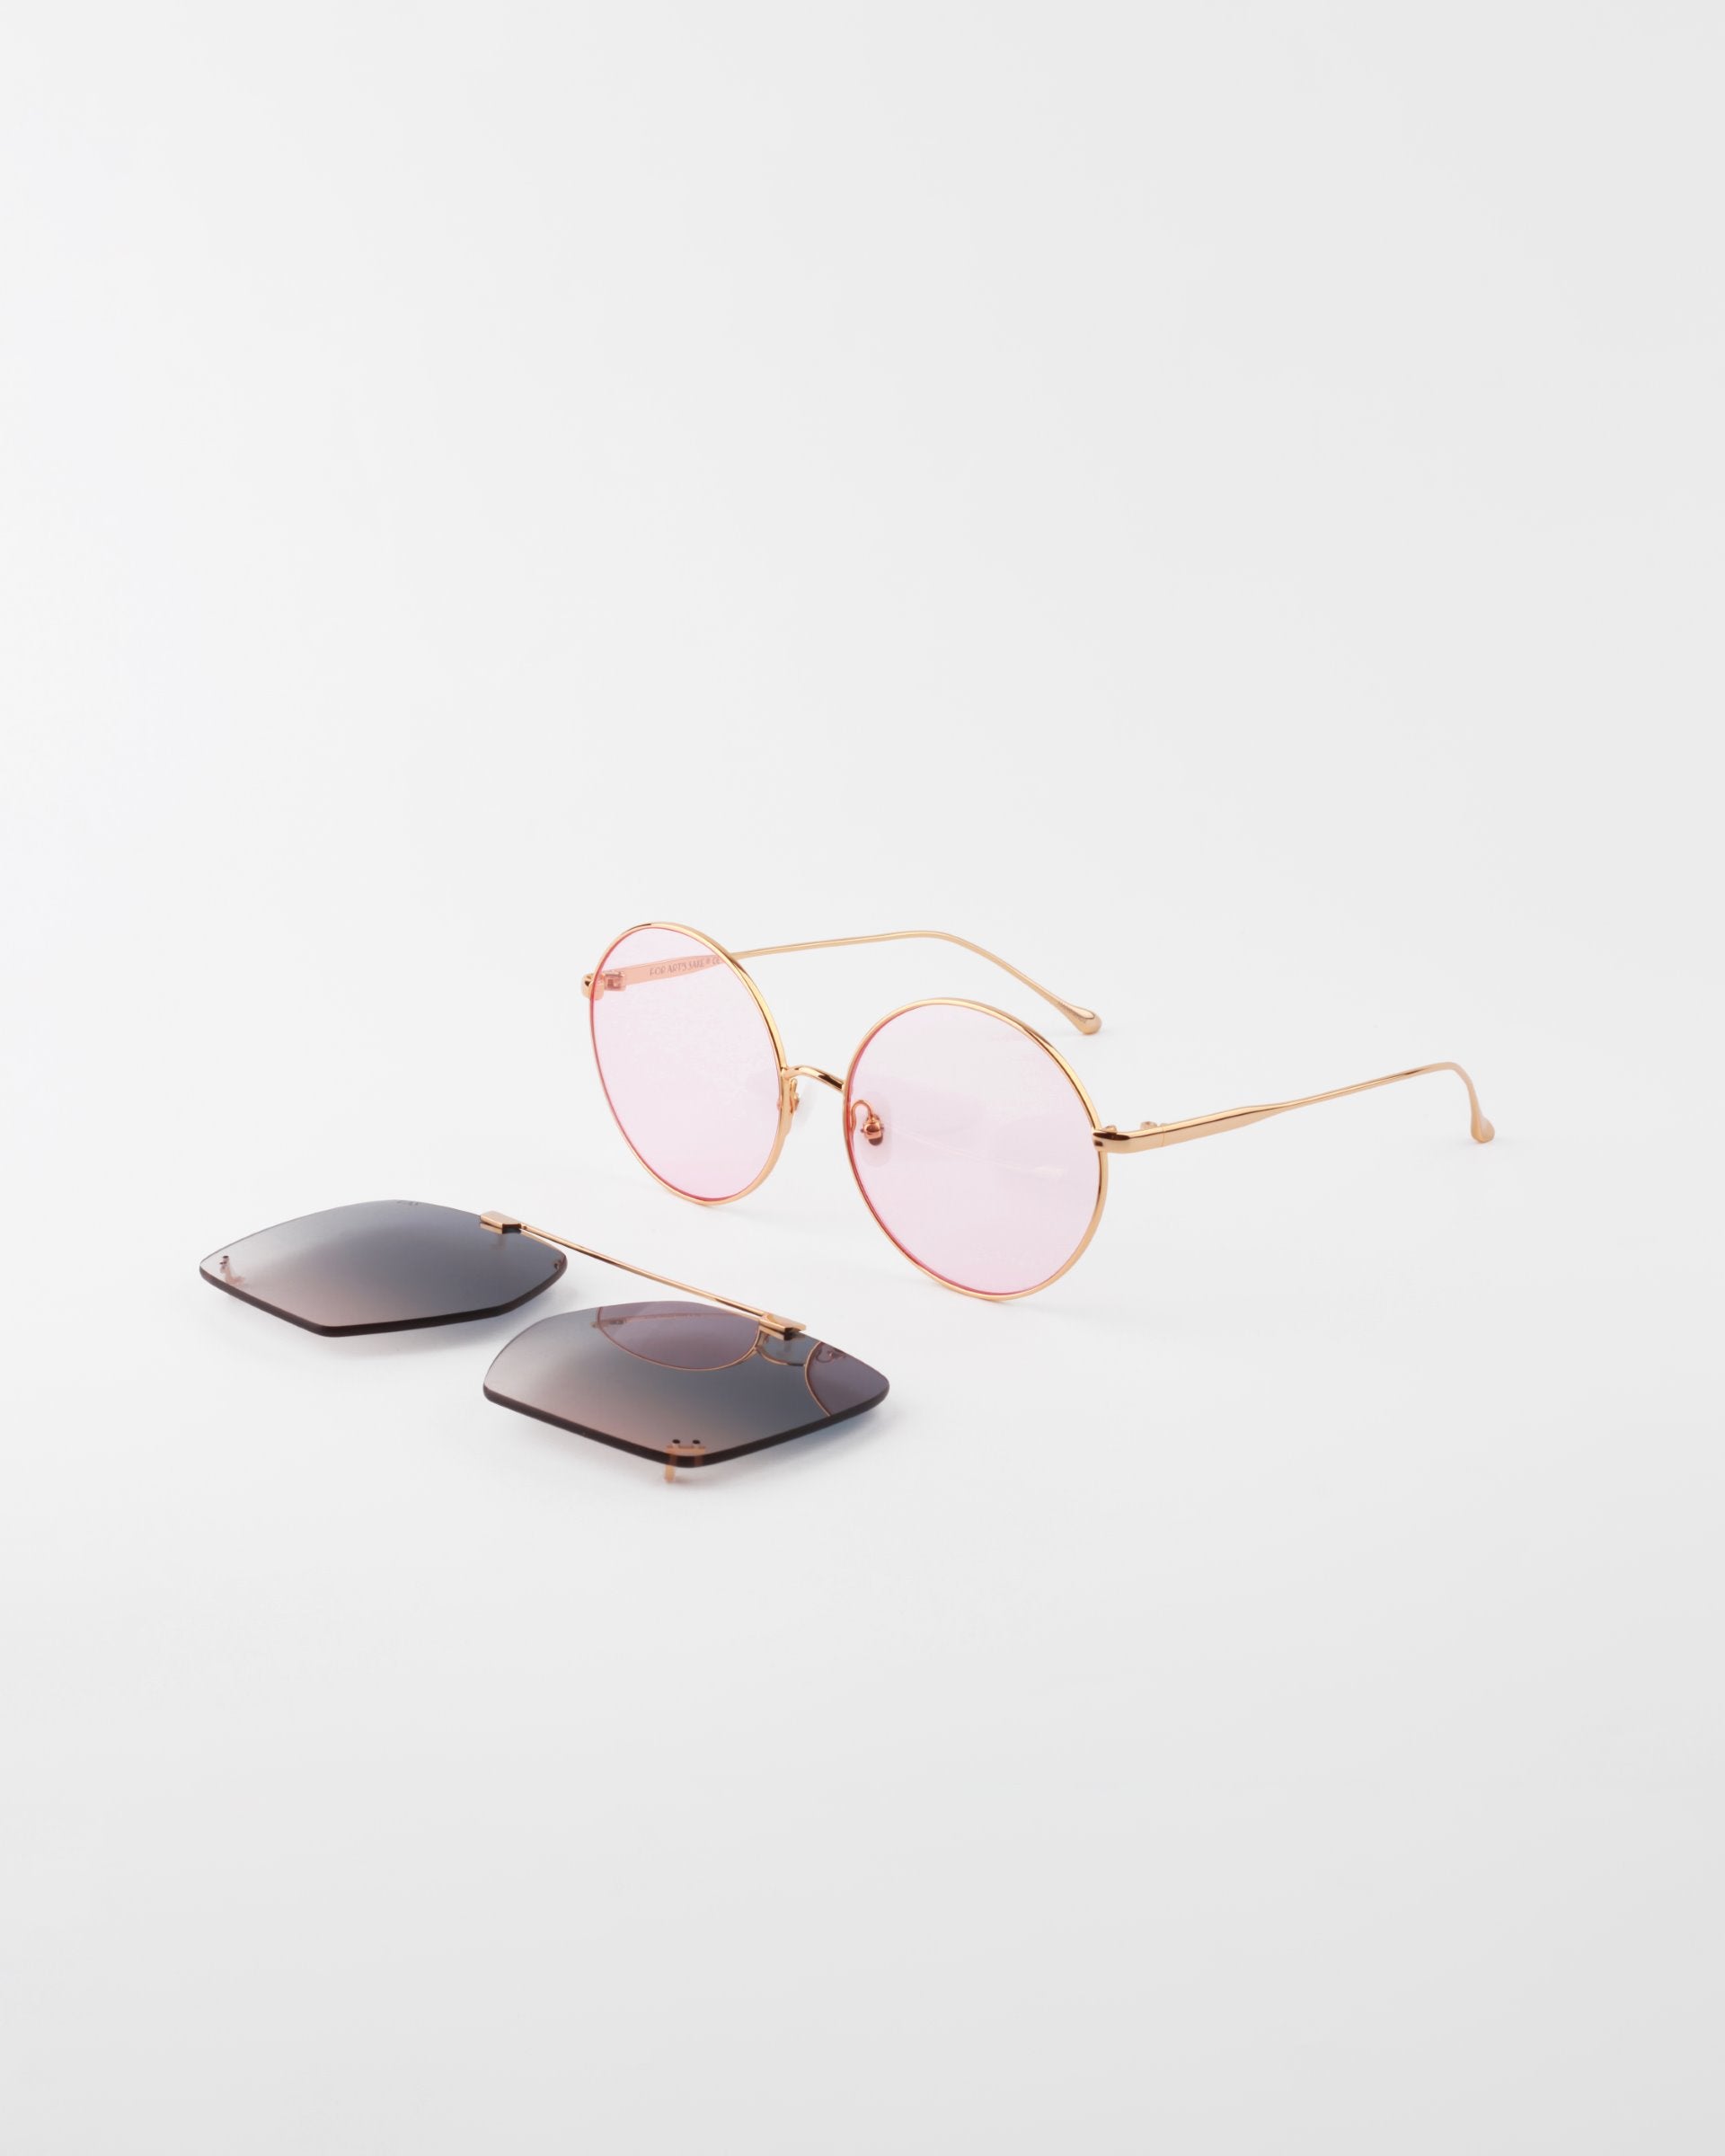 A pair of round, 18-karat gold-plated eyeglasses with light pink lenses, called &quot;Last Summer&quot; by For Art&#39;s Sake®, are displayed on a white surface. Beside the glasses, there are two rectangular dark gray clip-on lenses unattached, offering additional UVA &amp; UVB protection.